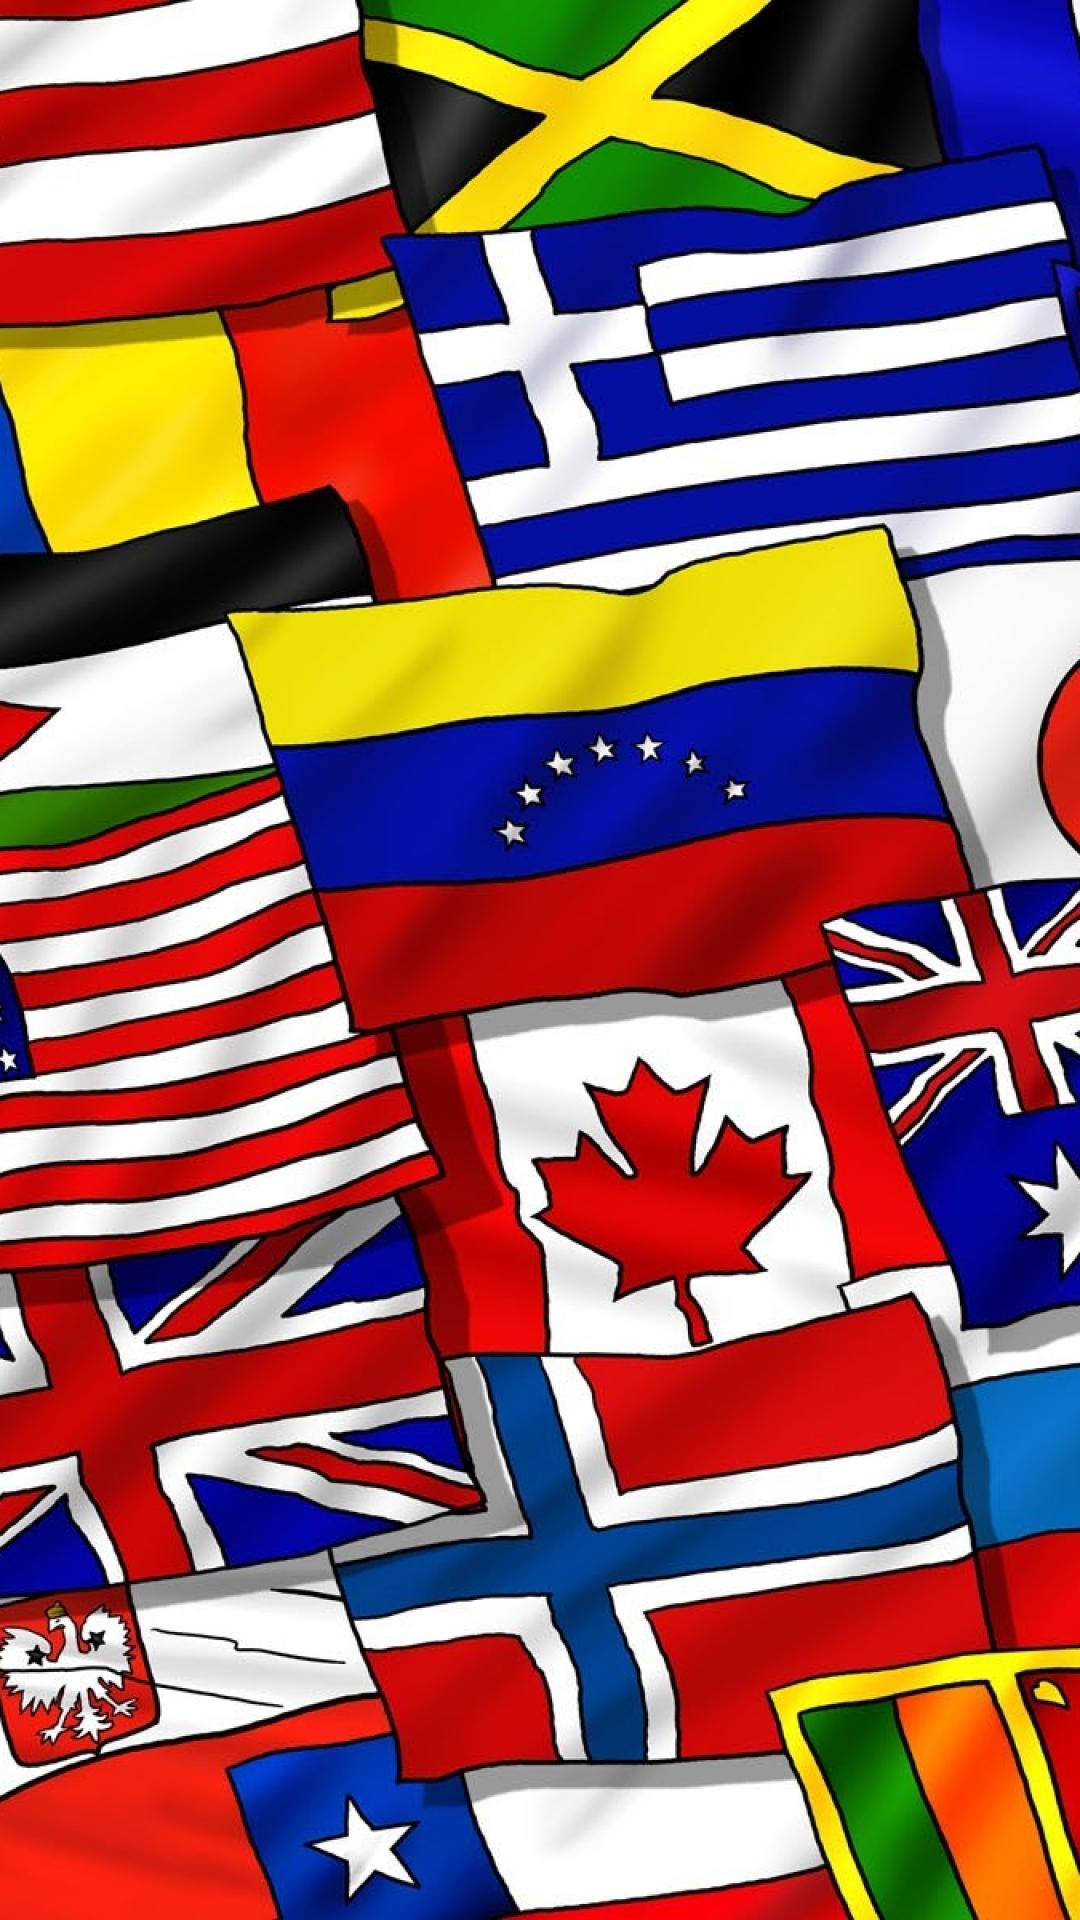 International Flags, World flags wallpapers, Global backgrounds, Country pride, 1080x1920 Full HD Phone